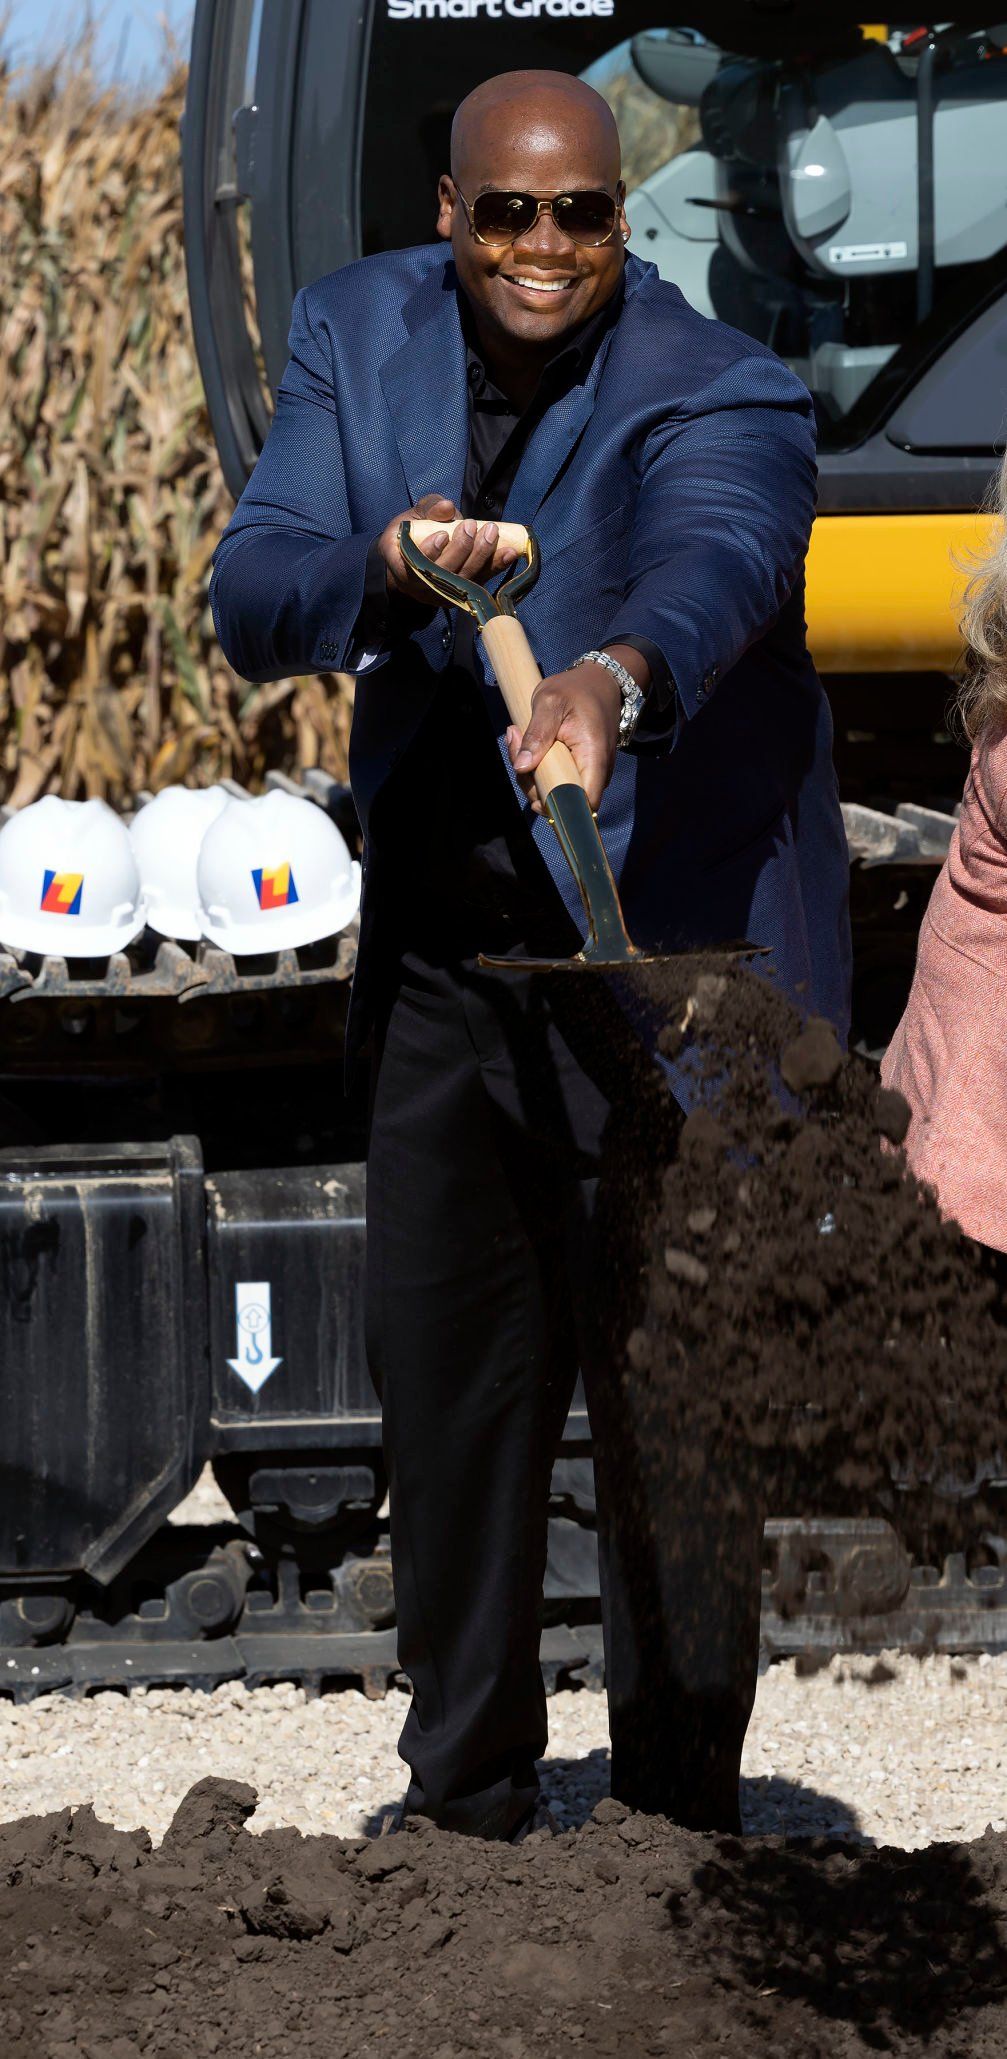 Frank Thomas tosses a shovelful of dirt during the Project Heaven groundbreaking ceremony at the Field of Dreams in Dyersville, Iowa, on Wednesday,Sept. 28, 2022.    PHOTO CREDIT: Stephen Gassman